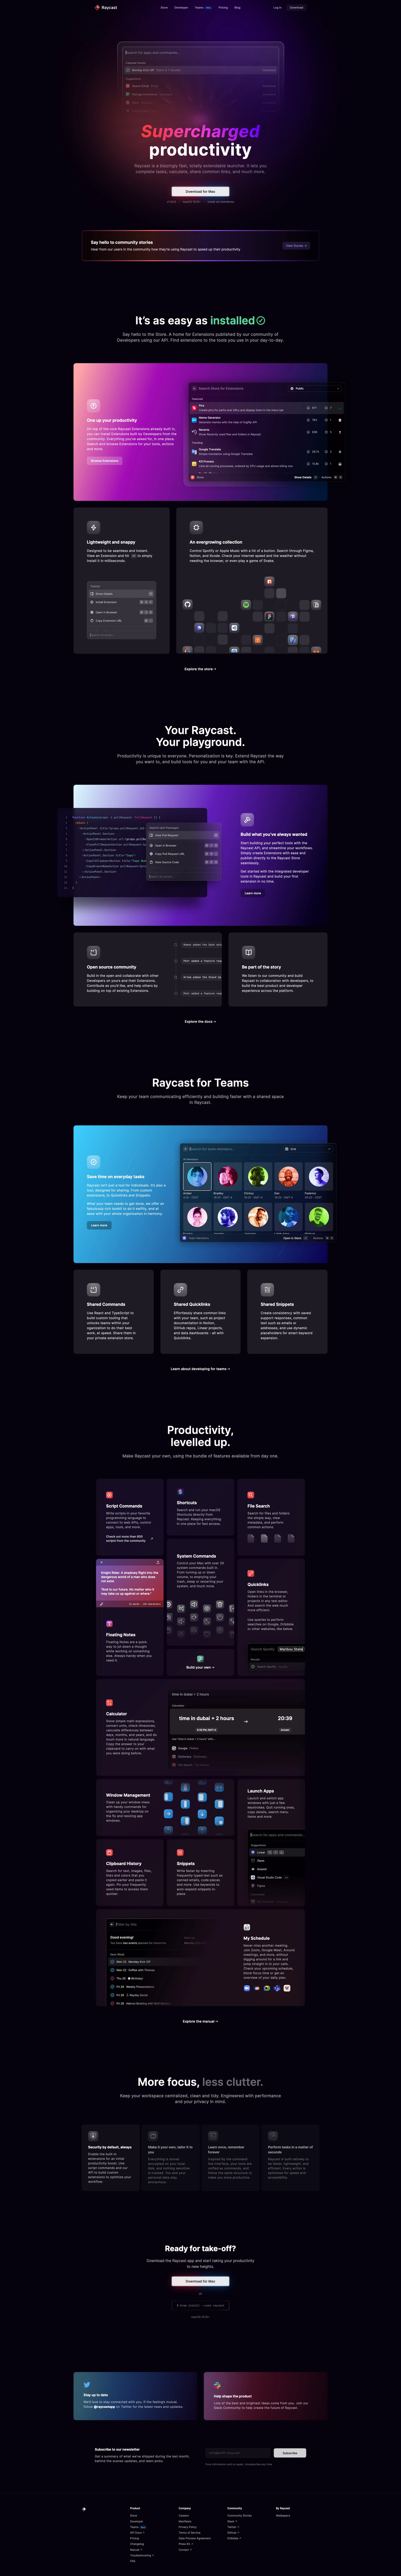 Raycast Landing Page Example: Supercharged productivity. Raycast is a blazingly fast, totally extendable launcher. It lets you complete tasks, calculate, share common links, and much more.